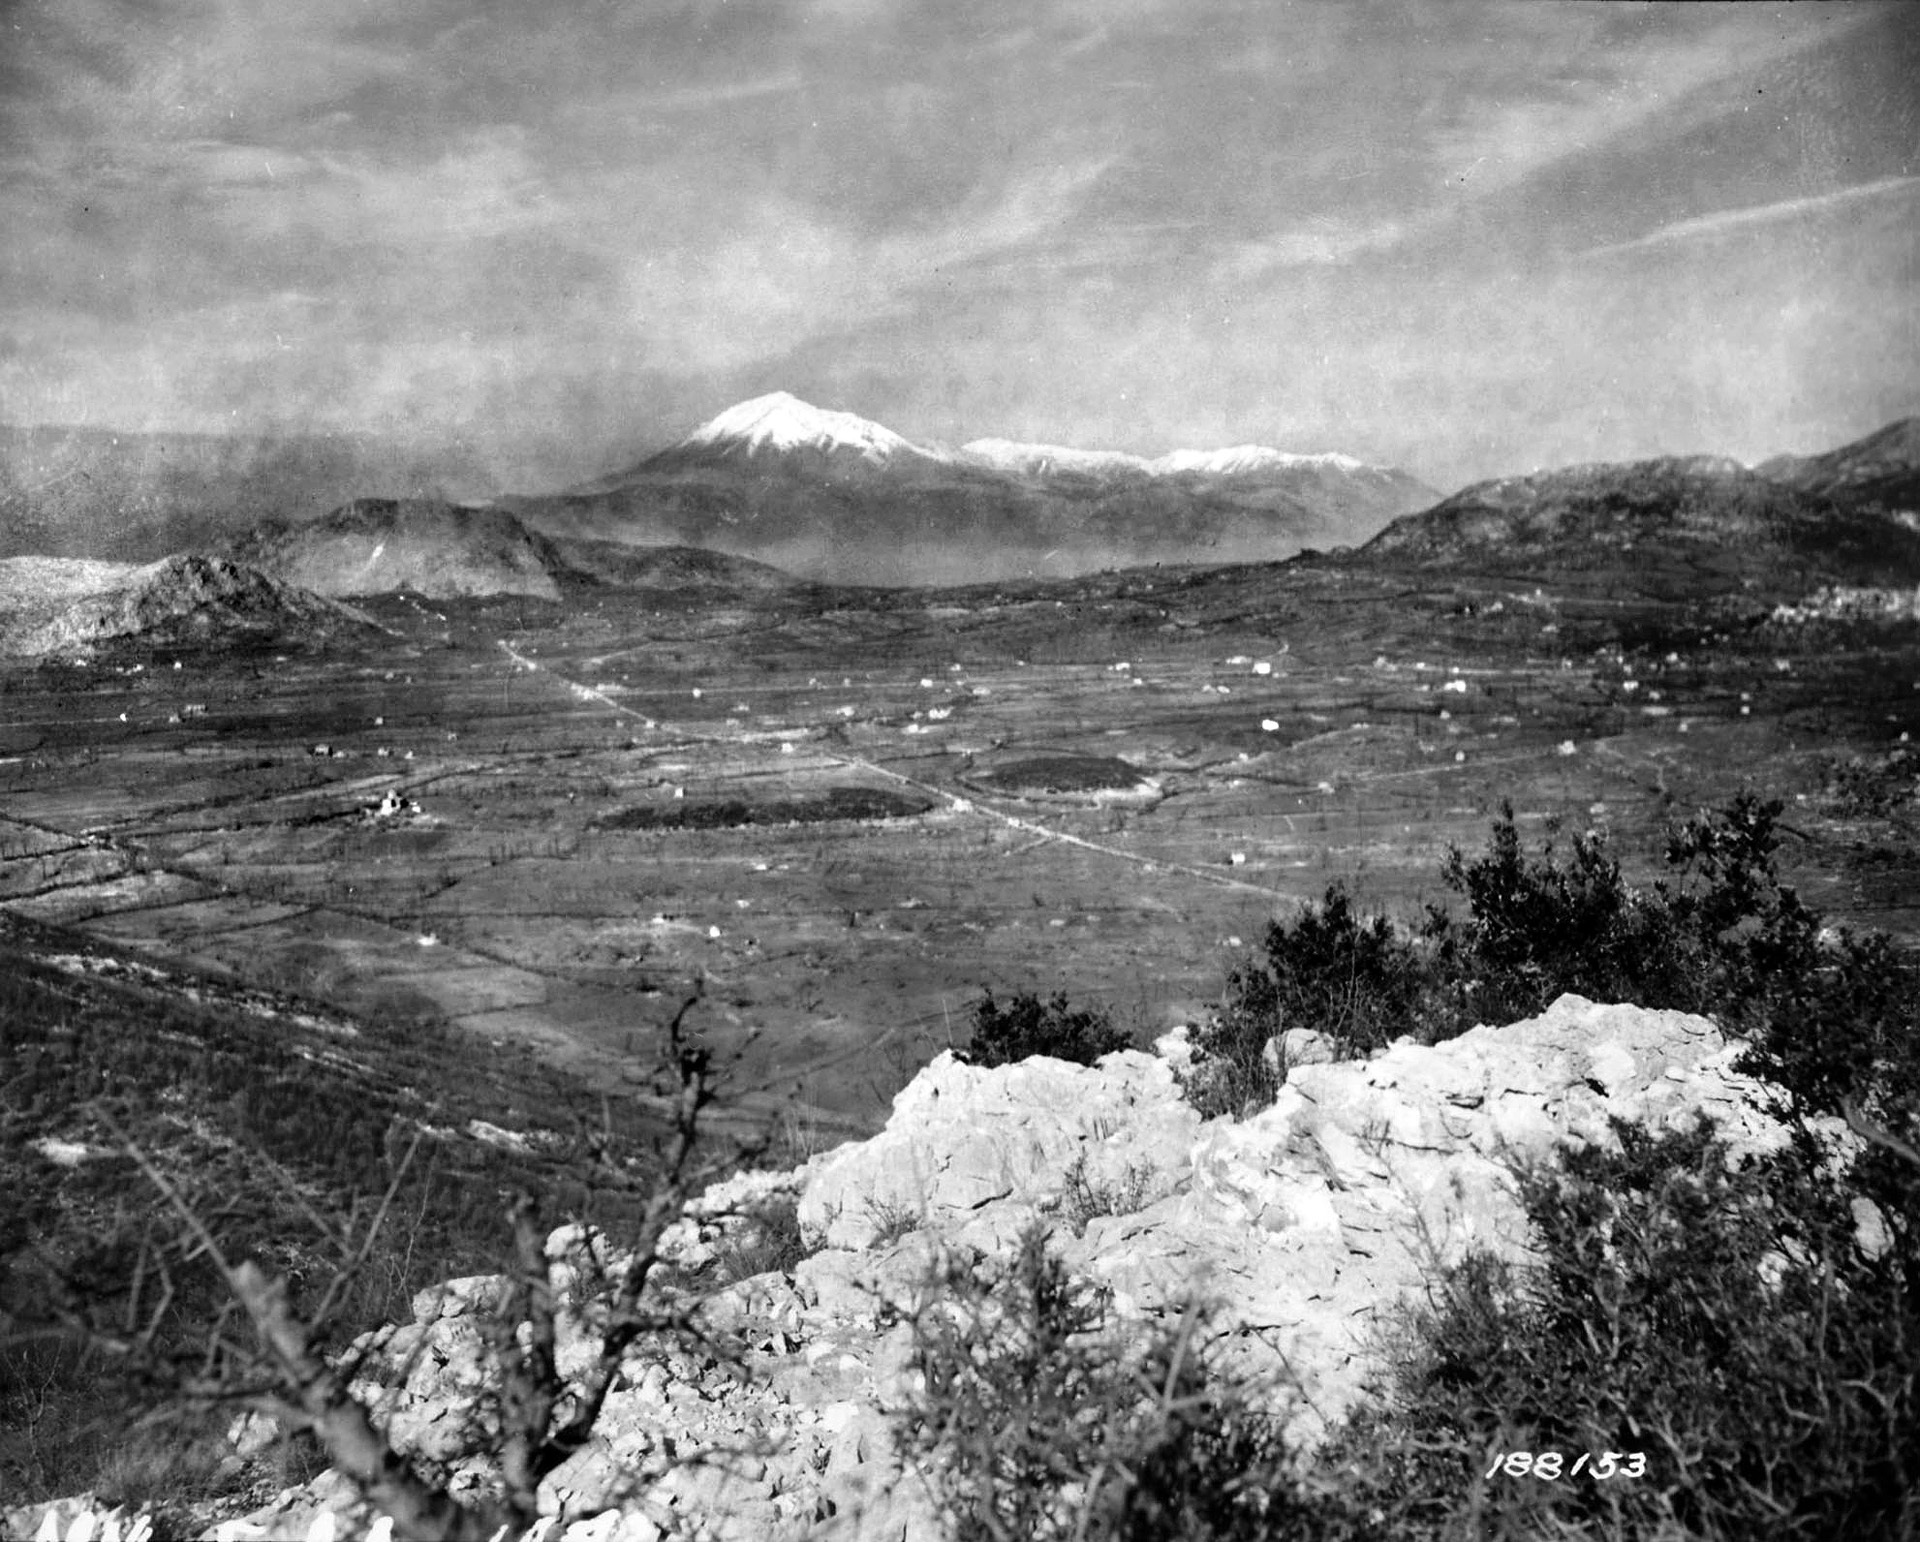 Mount Porchia looms at left in this image, while Mount Chiaia is at right, and the snow-covered peak of Mount Cairo is seen in the distance. American combat engineers fought fiercely to take and hold high ground during the sluggish advance. 